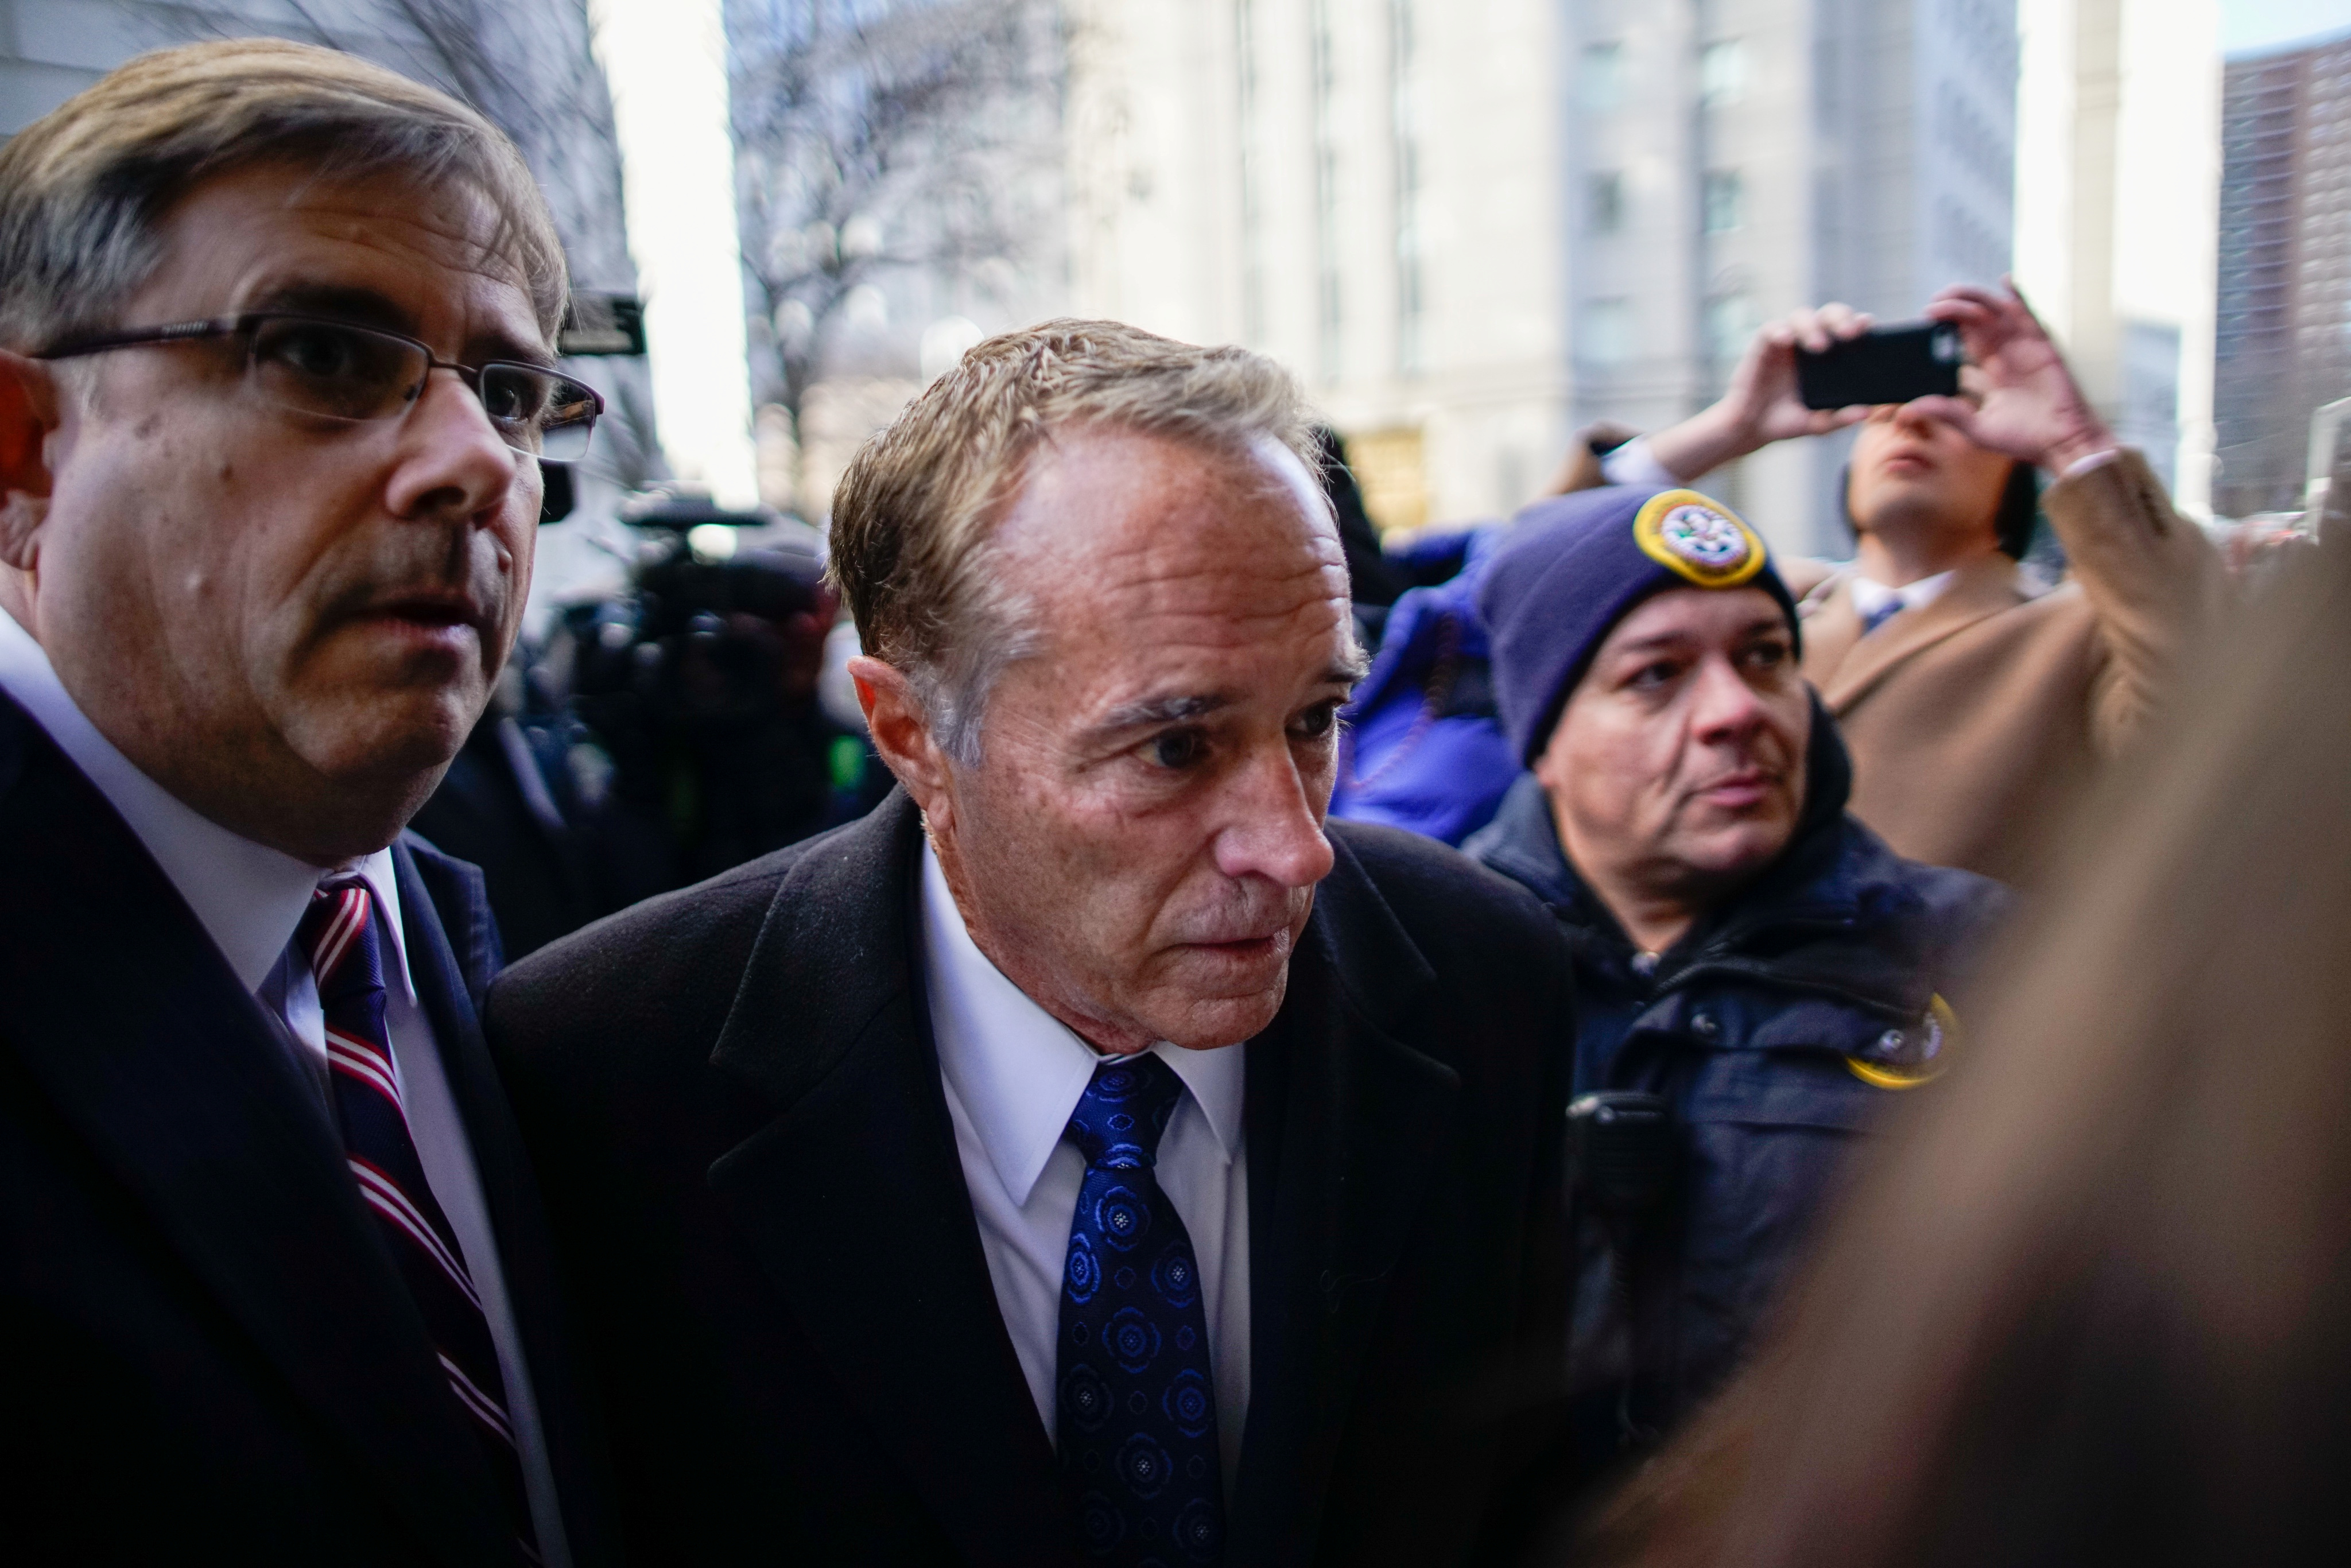 Chris Collins, former U.S. Representative for New York's 27th congressional district arrives to New York Federal Court for his sentence in the Manhattan borough of New York City, New York, U.S., January 17, 2020. REUTERS/Eduardo Munoz 